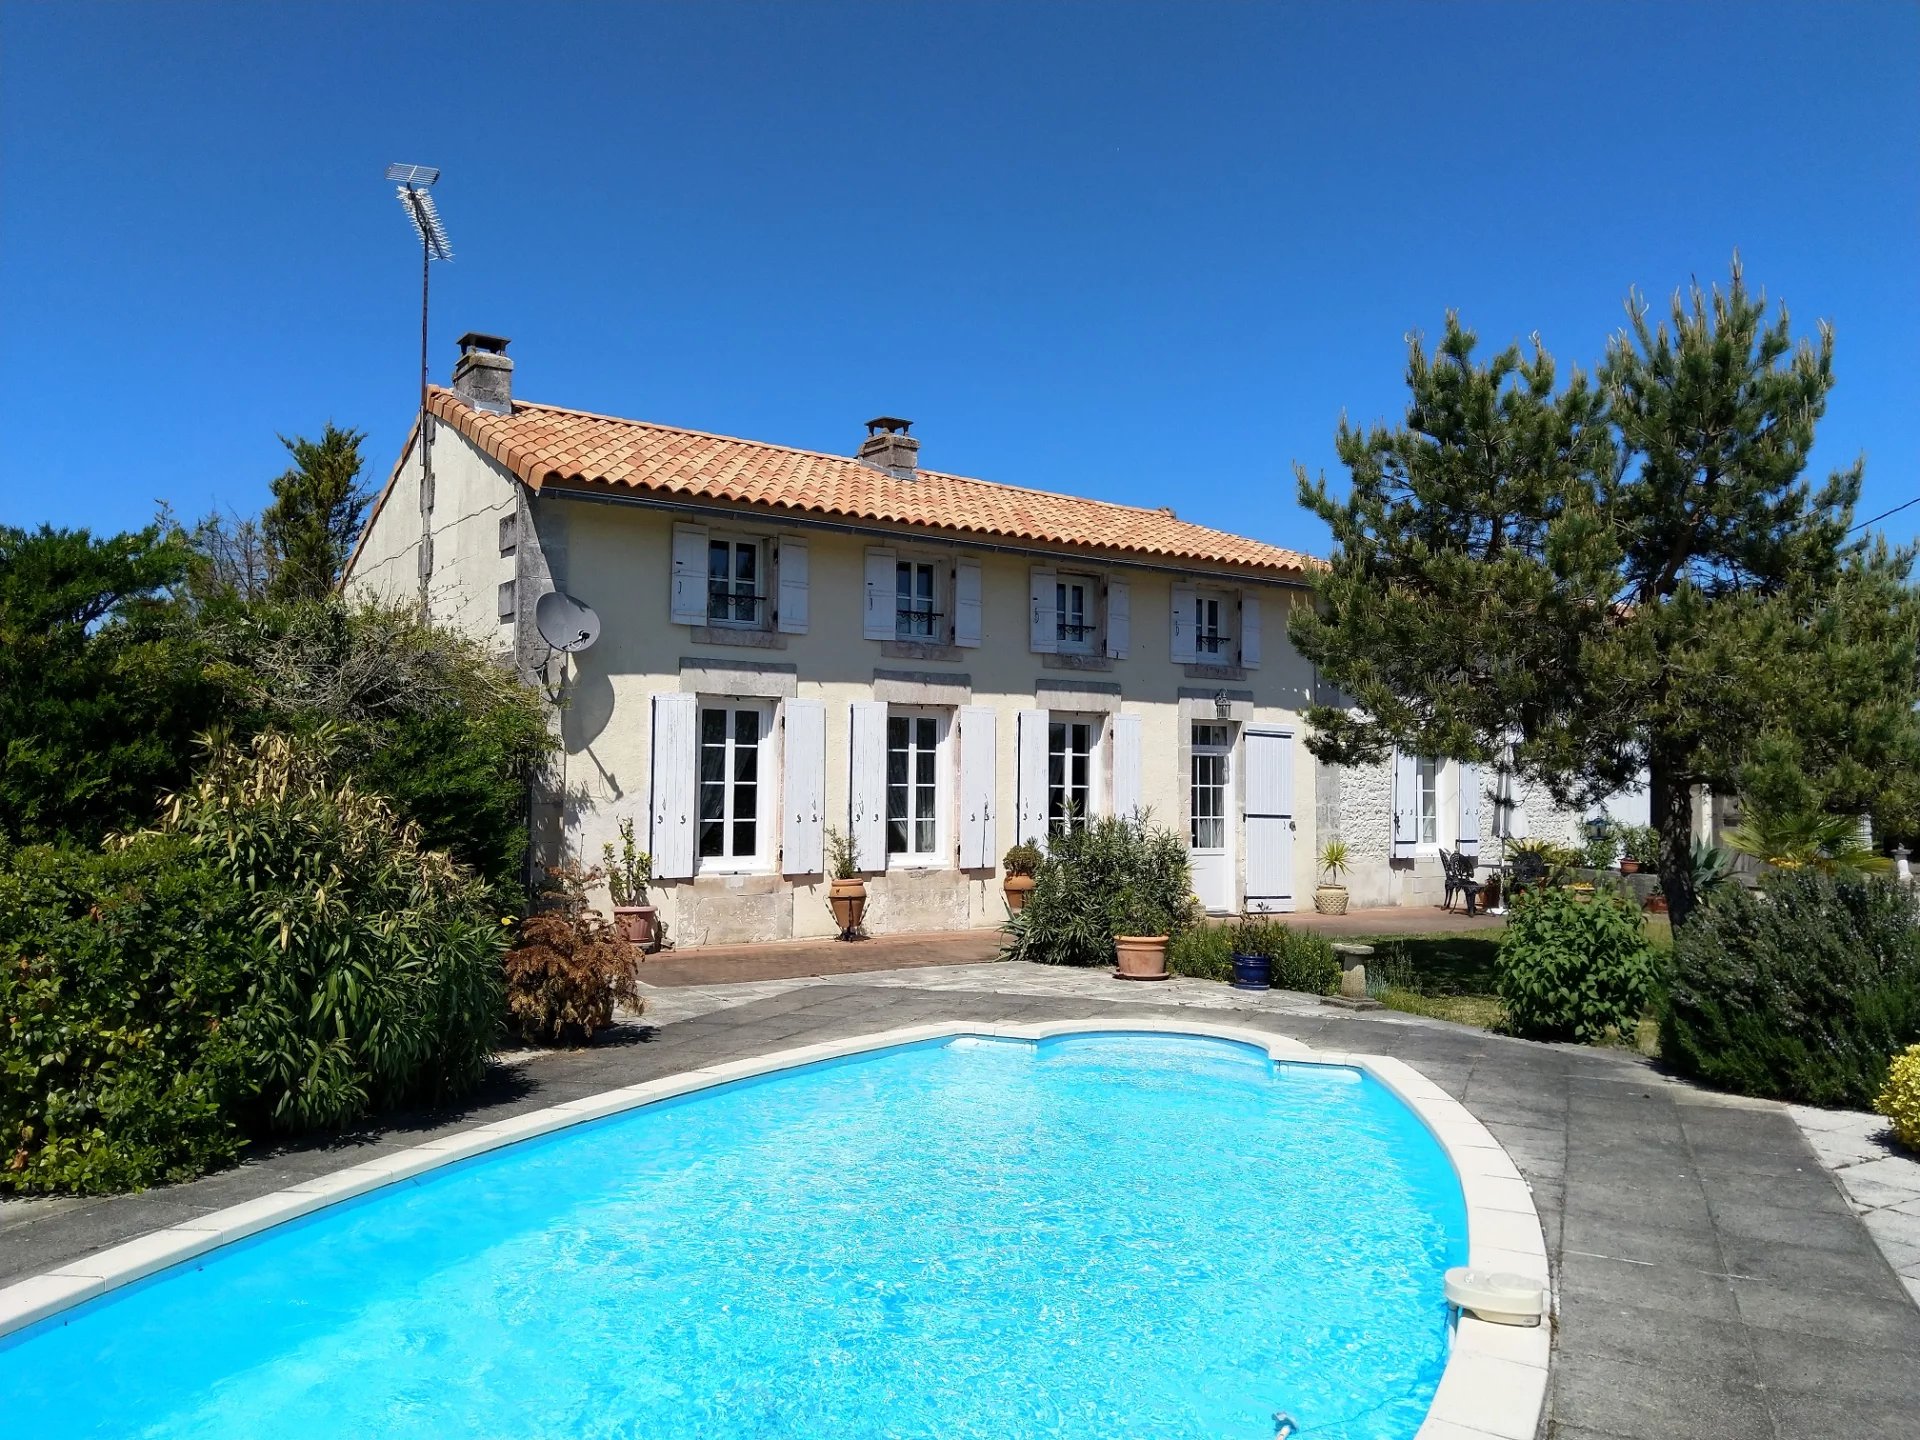 Four bedroom house with gite, pool and land.